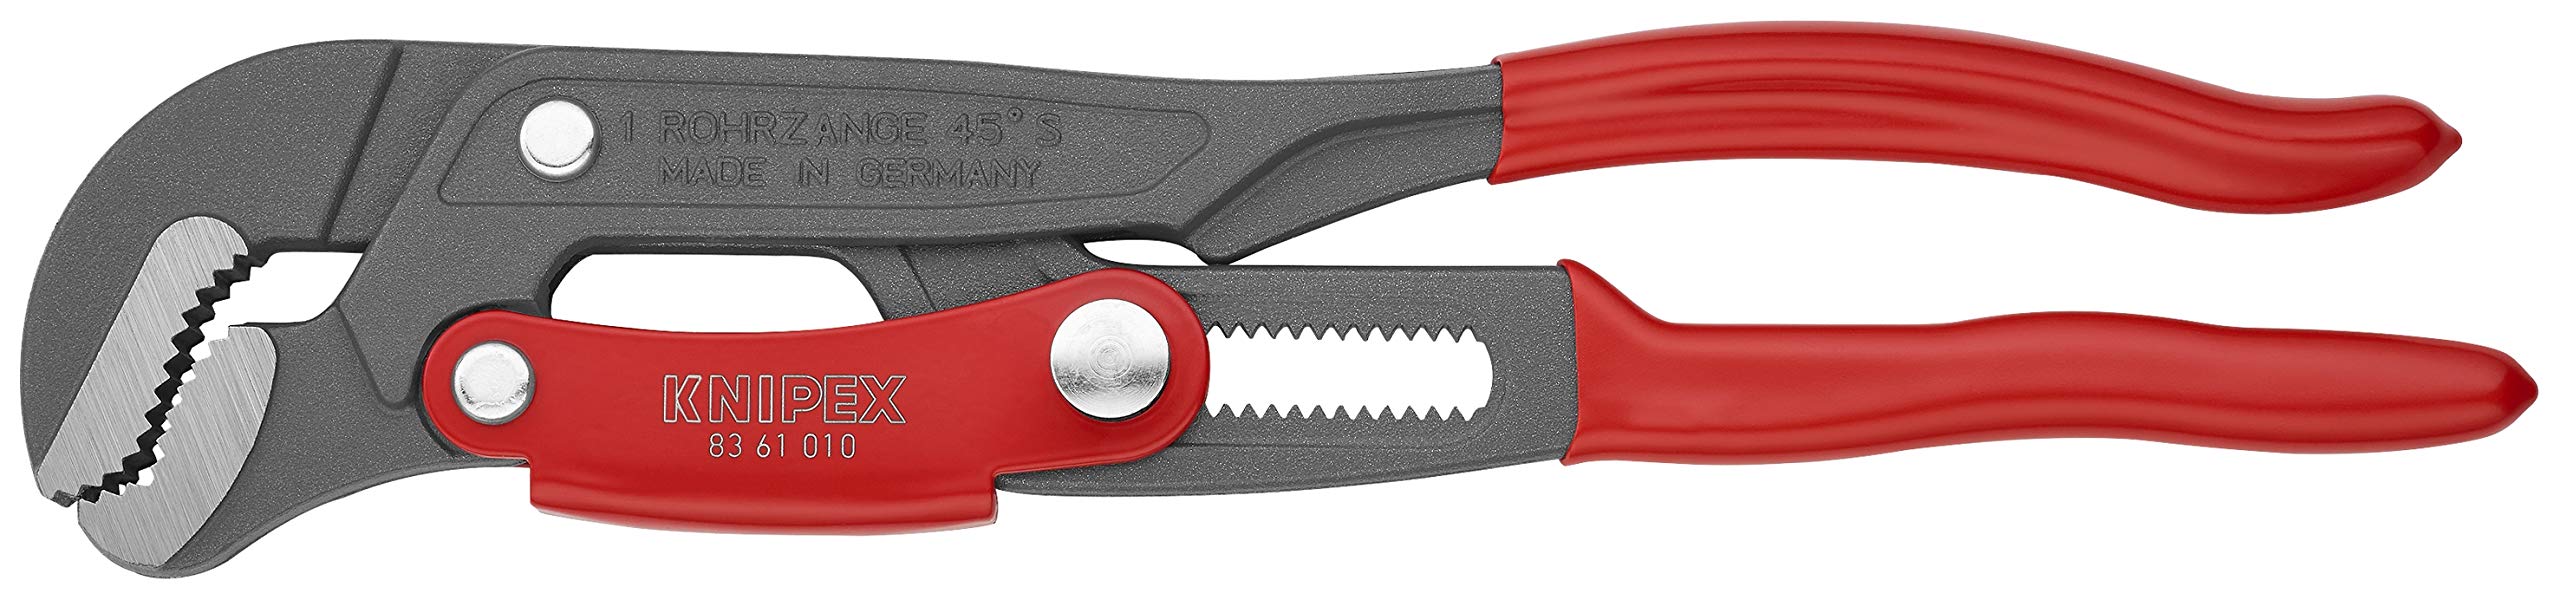 12" Knipex Tools Rapid Adjust Swedish Pipe Wrench $55 + Free Shipping w/  Prime